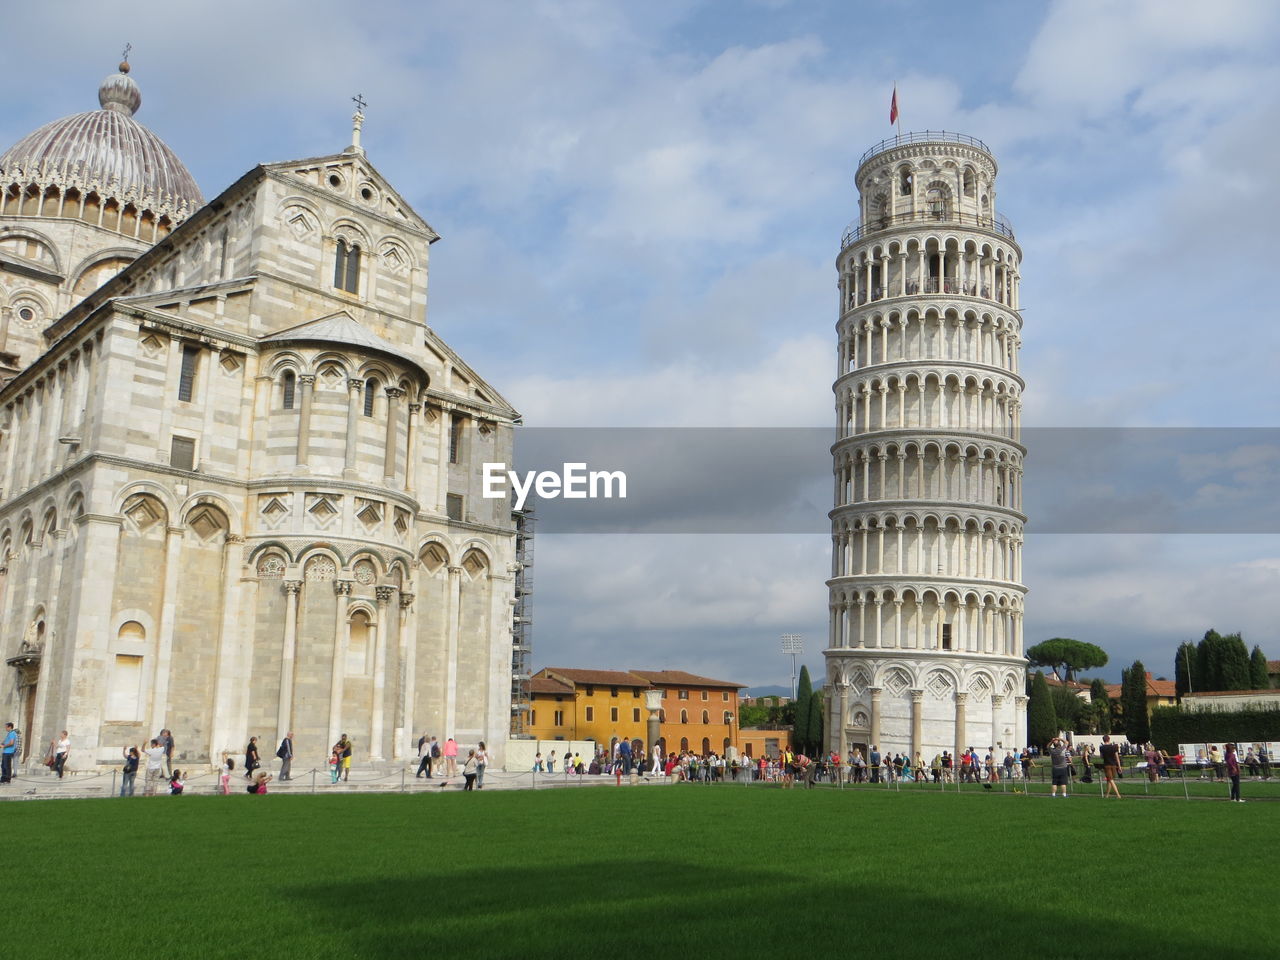 Leaning tower of pisa and cathedral against cloudy sky at piazza dei miracoli